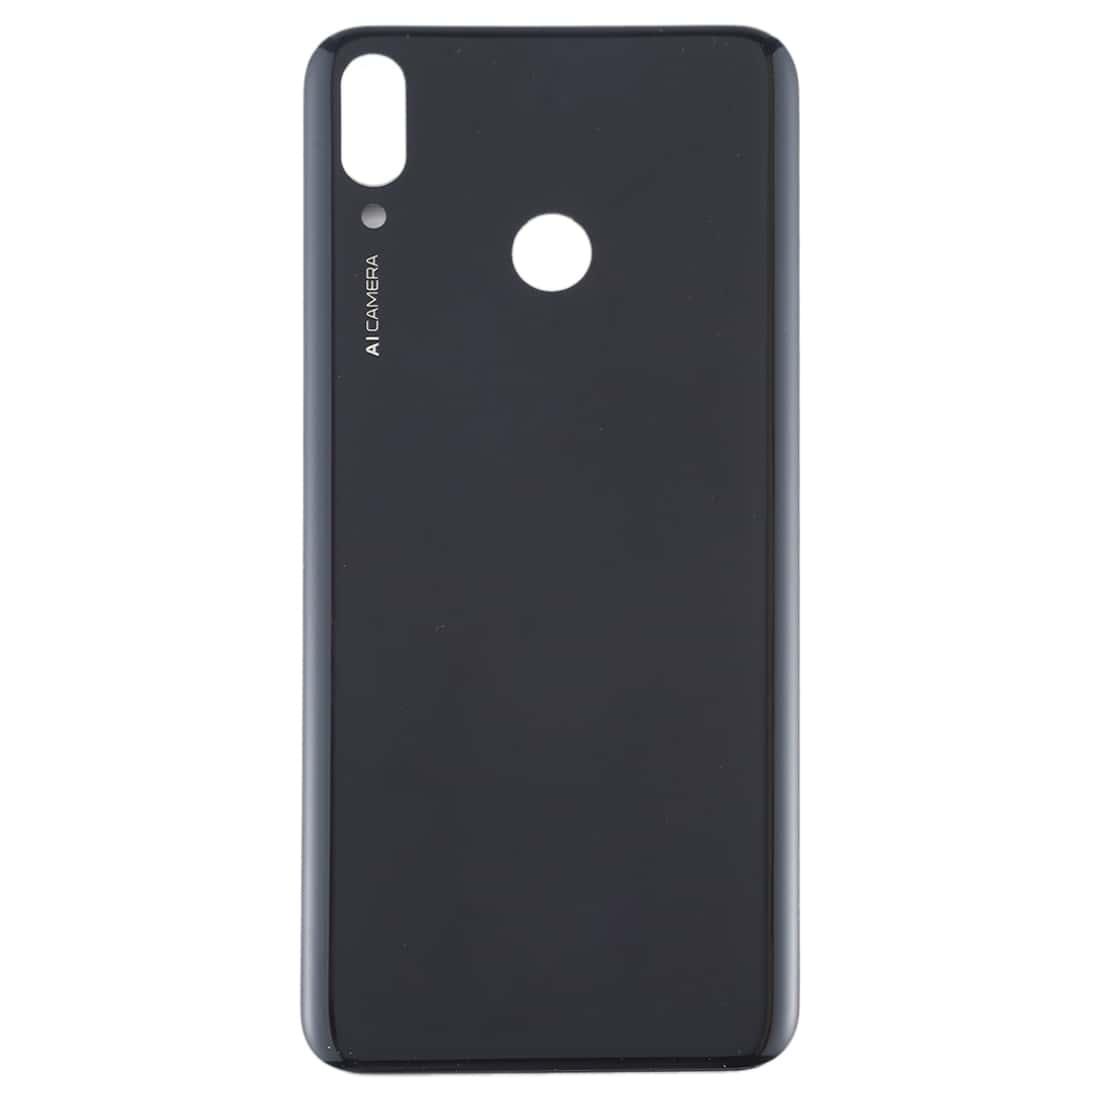 Back Panel Housing Body for Huawei Y9 2019 Black